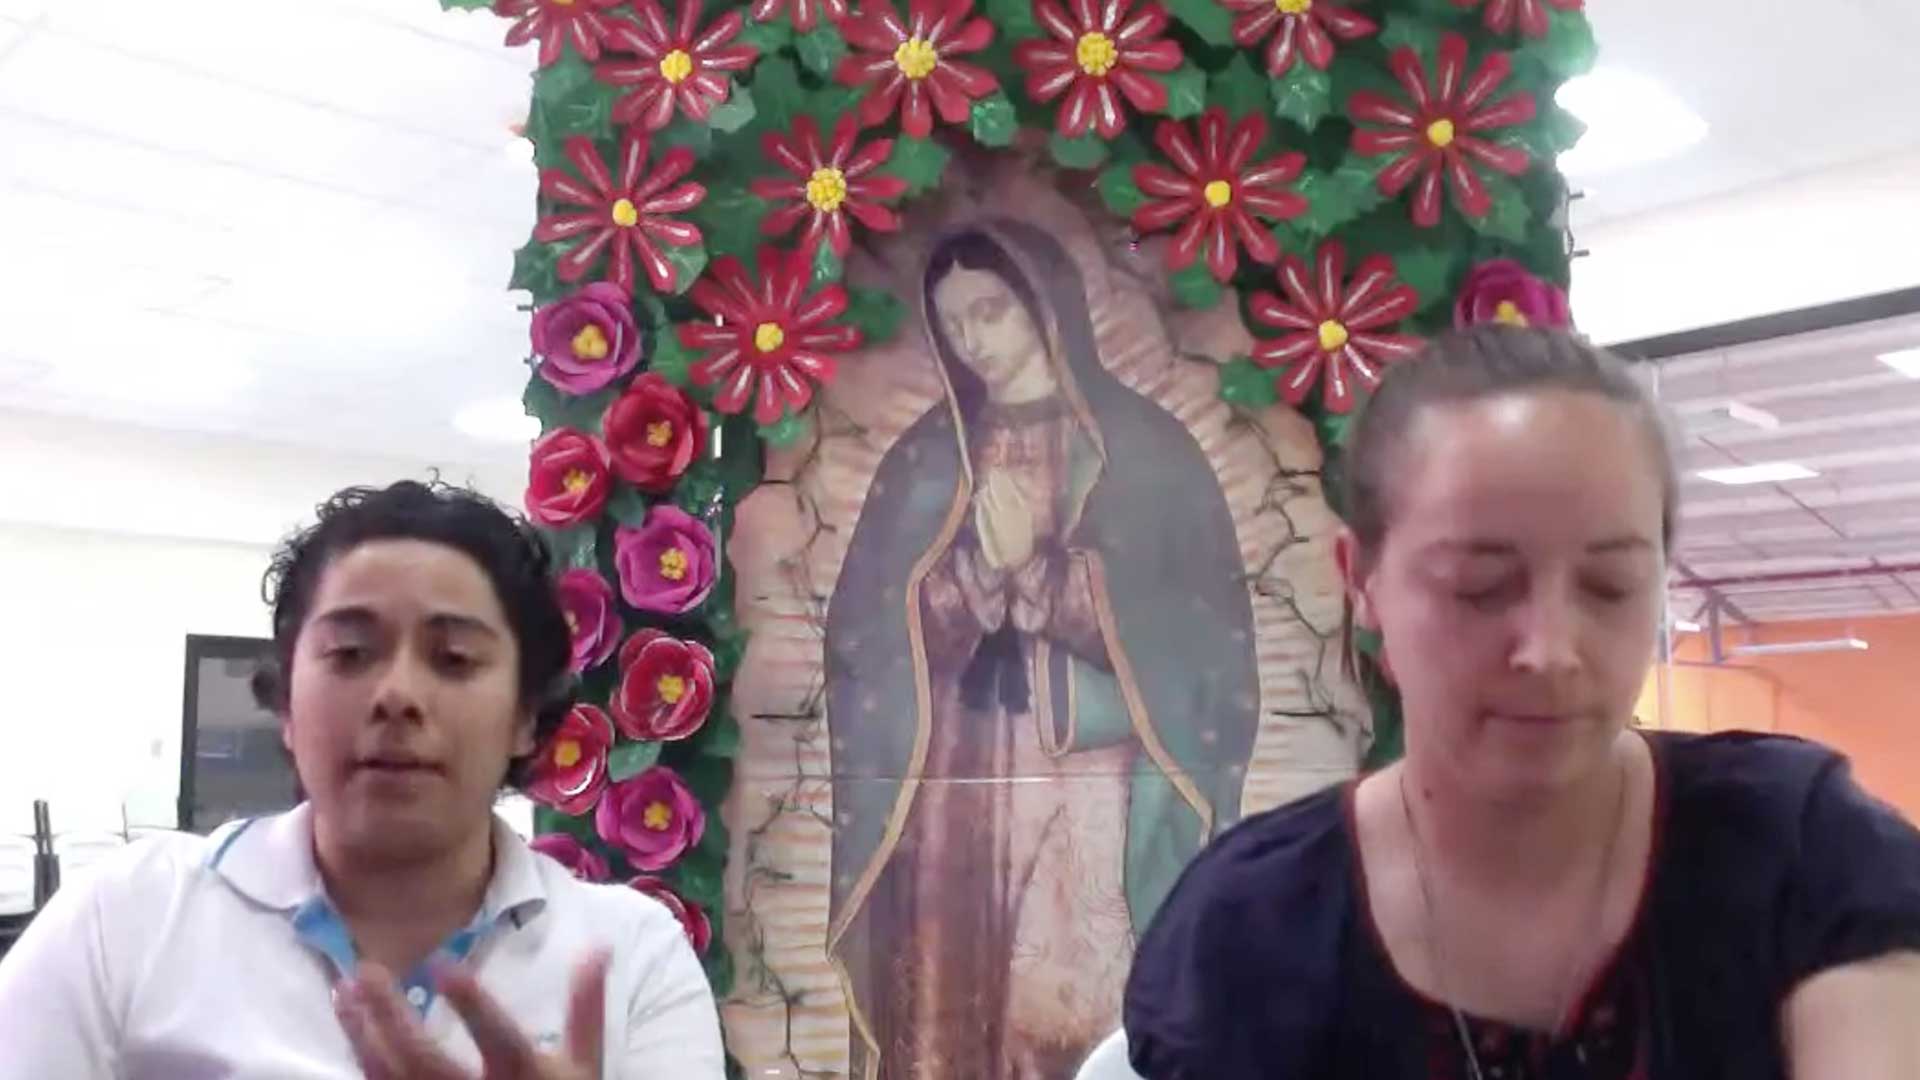 Kino Border Initiative staffers Josefina Bejarano Padilla and Tracy Hogan read messages sent from across the country for Mother's Day, in this still image from the shelter's Facebook Live event.